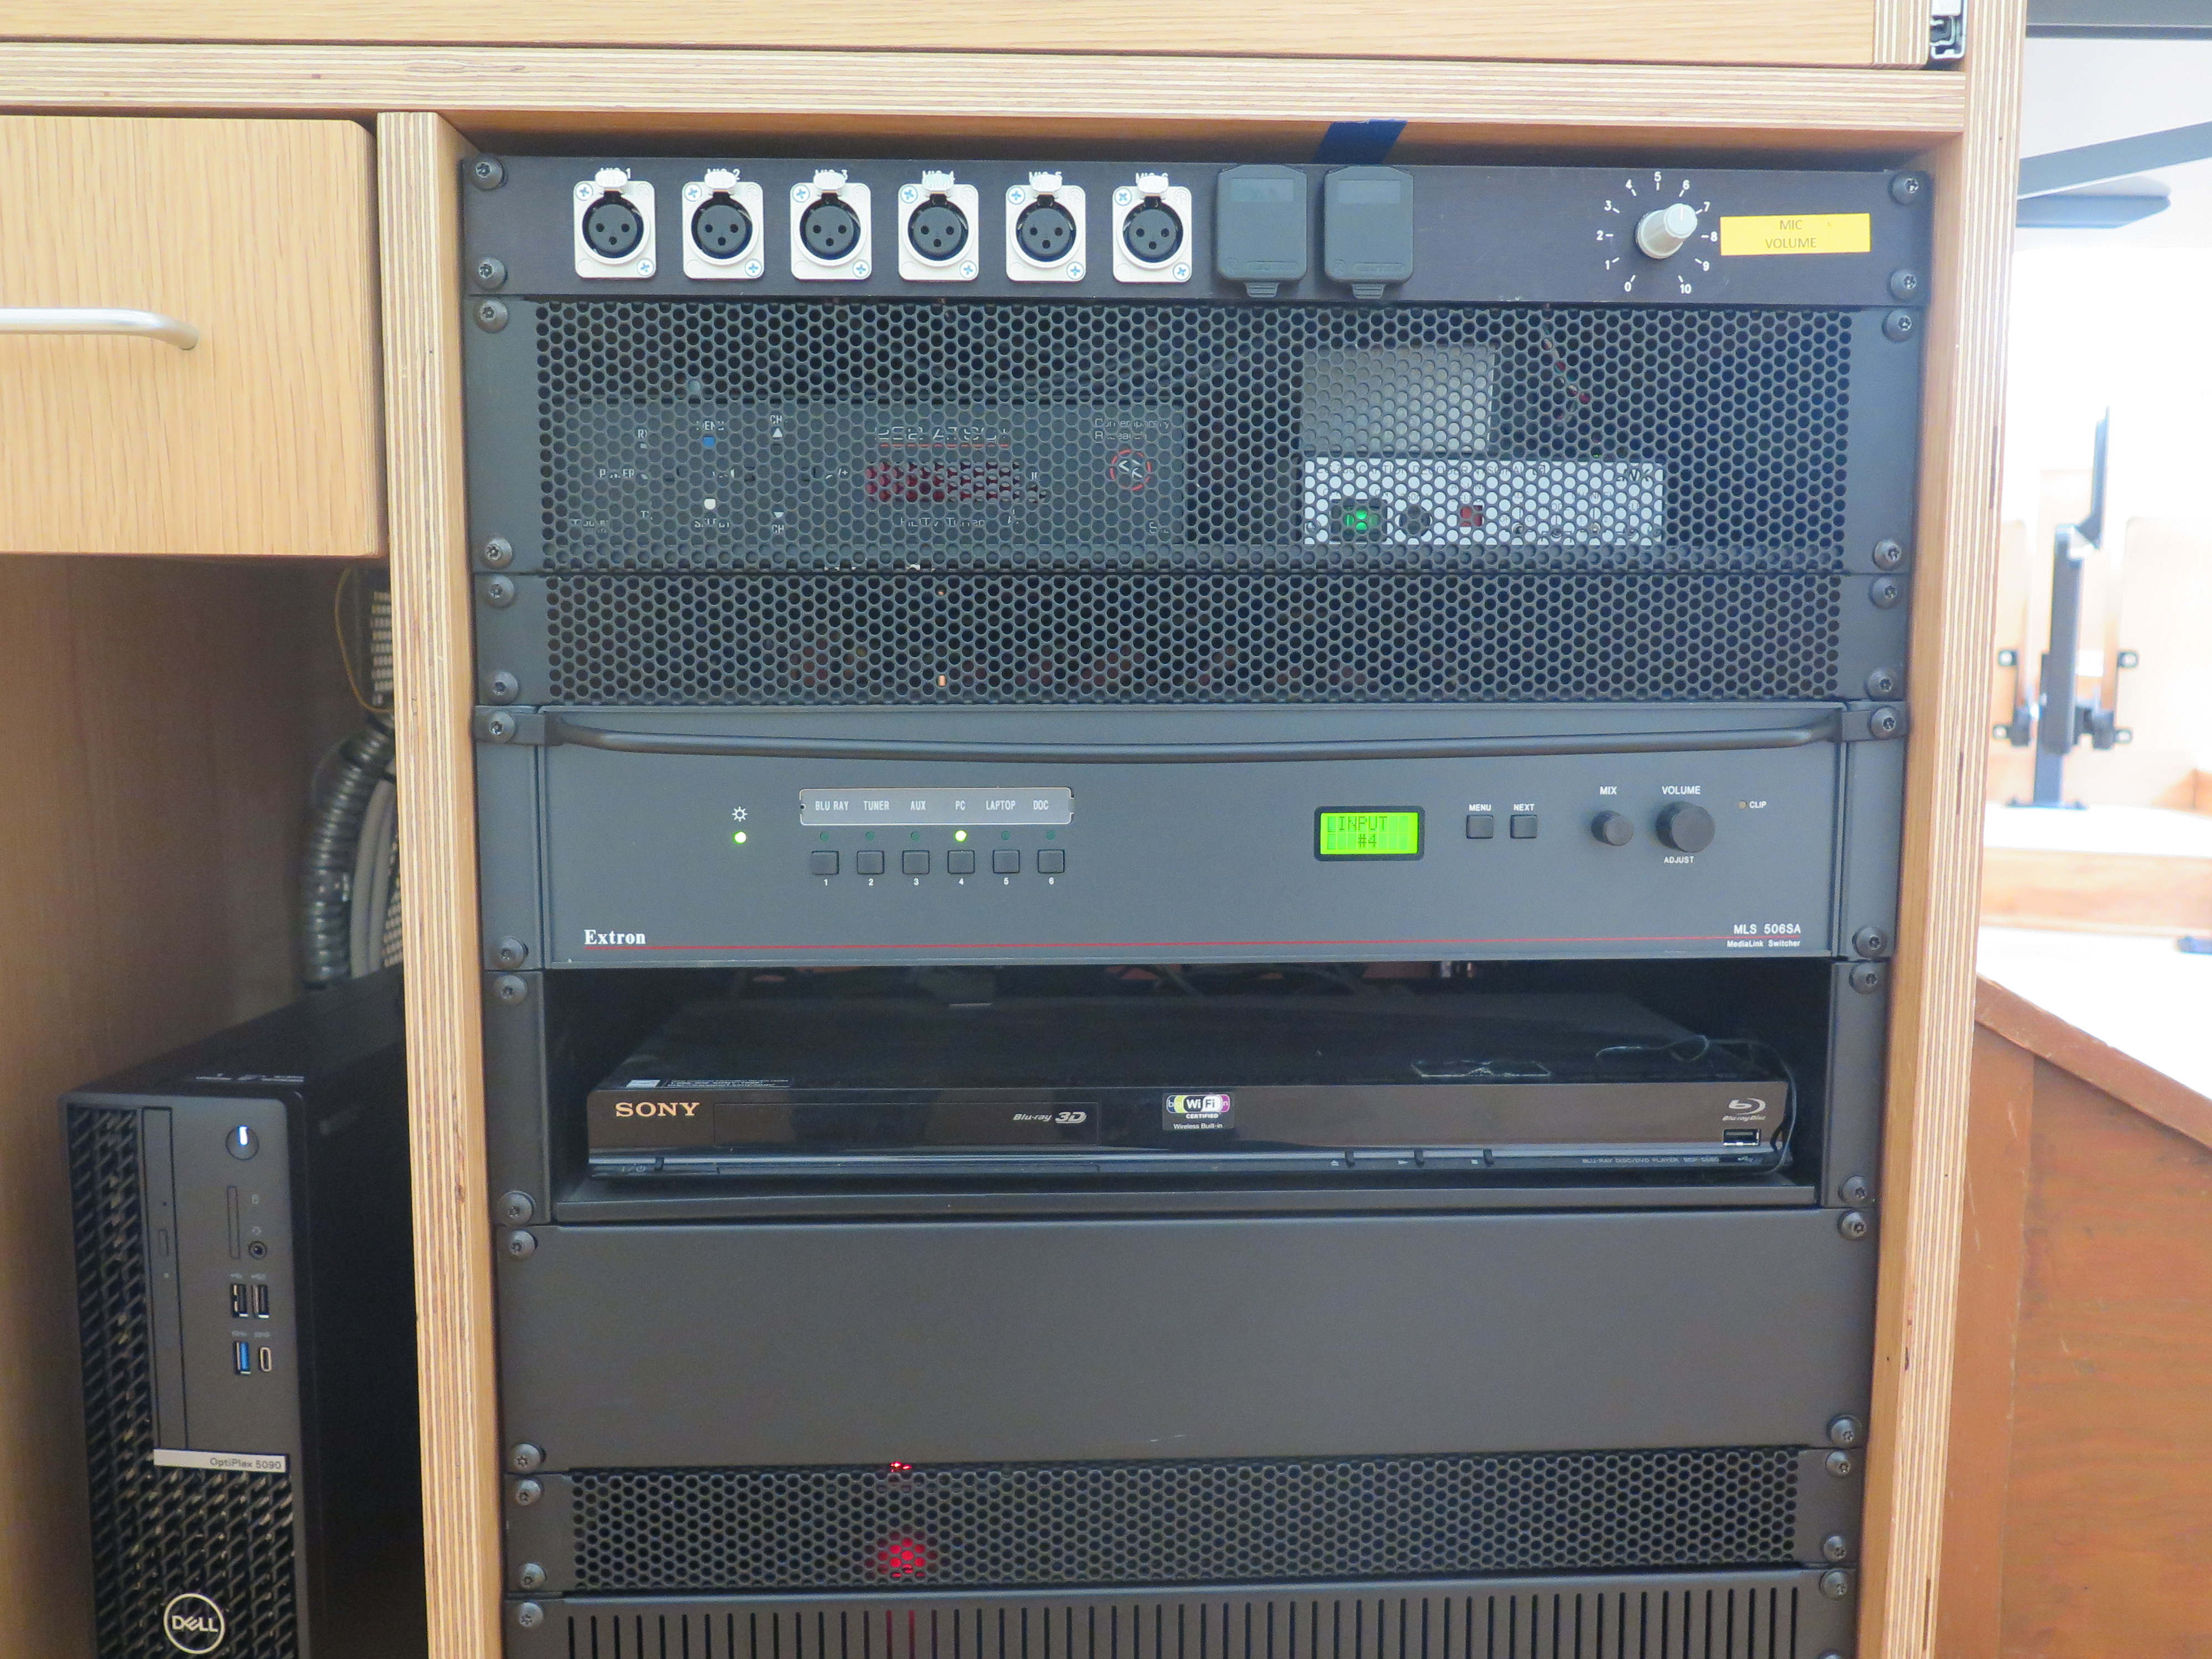 Front of Equipment rack showing Microphone volume, AV Switcher. Below that is Blue-Ray/DVD Player. To the left is the compartment with the Dell Computer CPU.